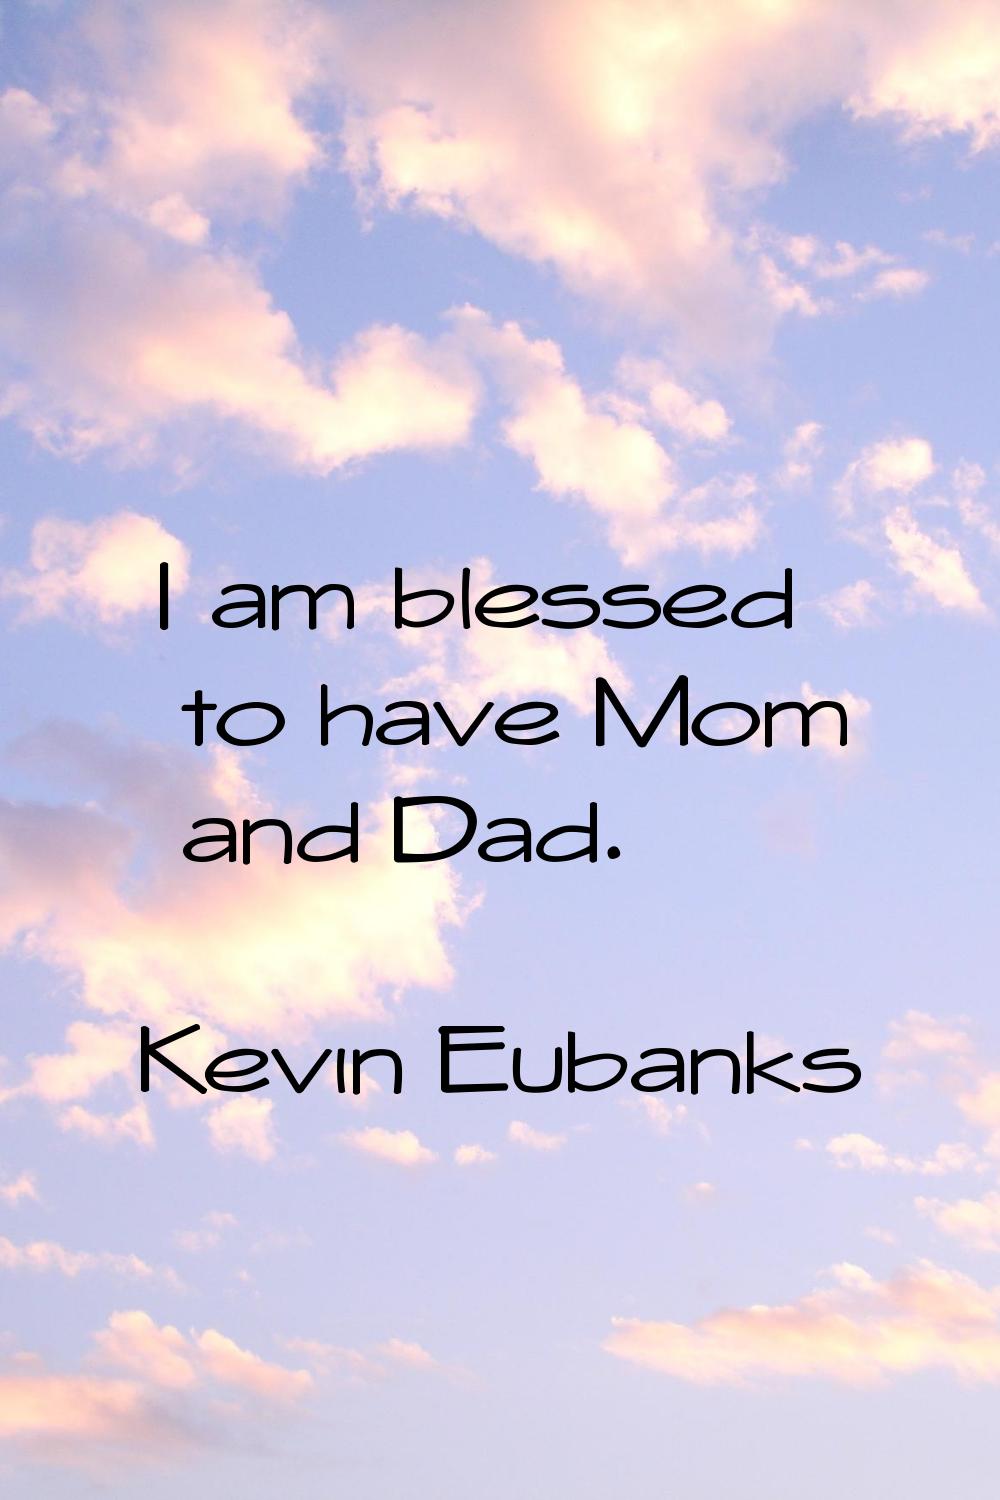 I am blessed to have Mom and Dad.